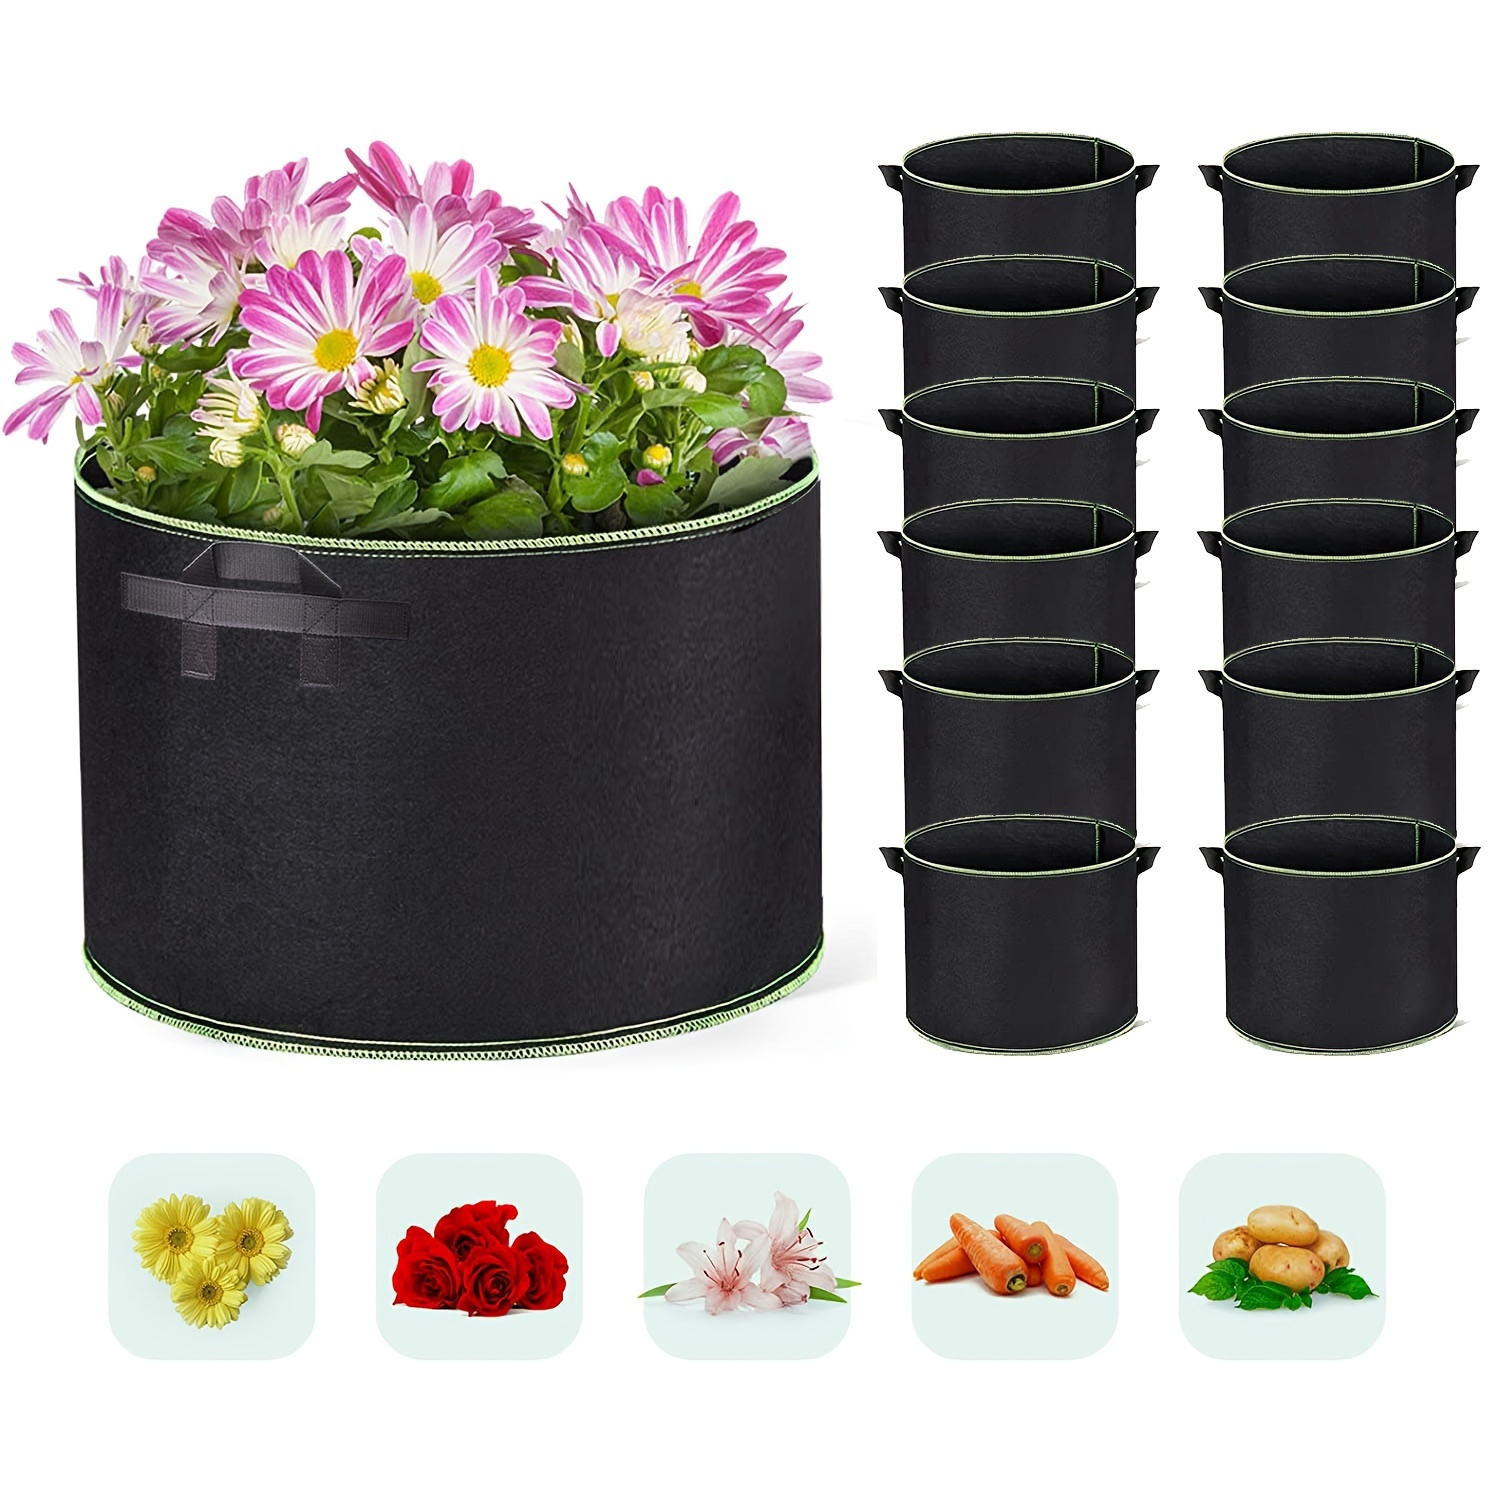 15+ 5 Gallon Plant Containers